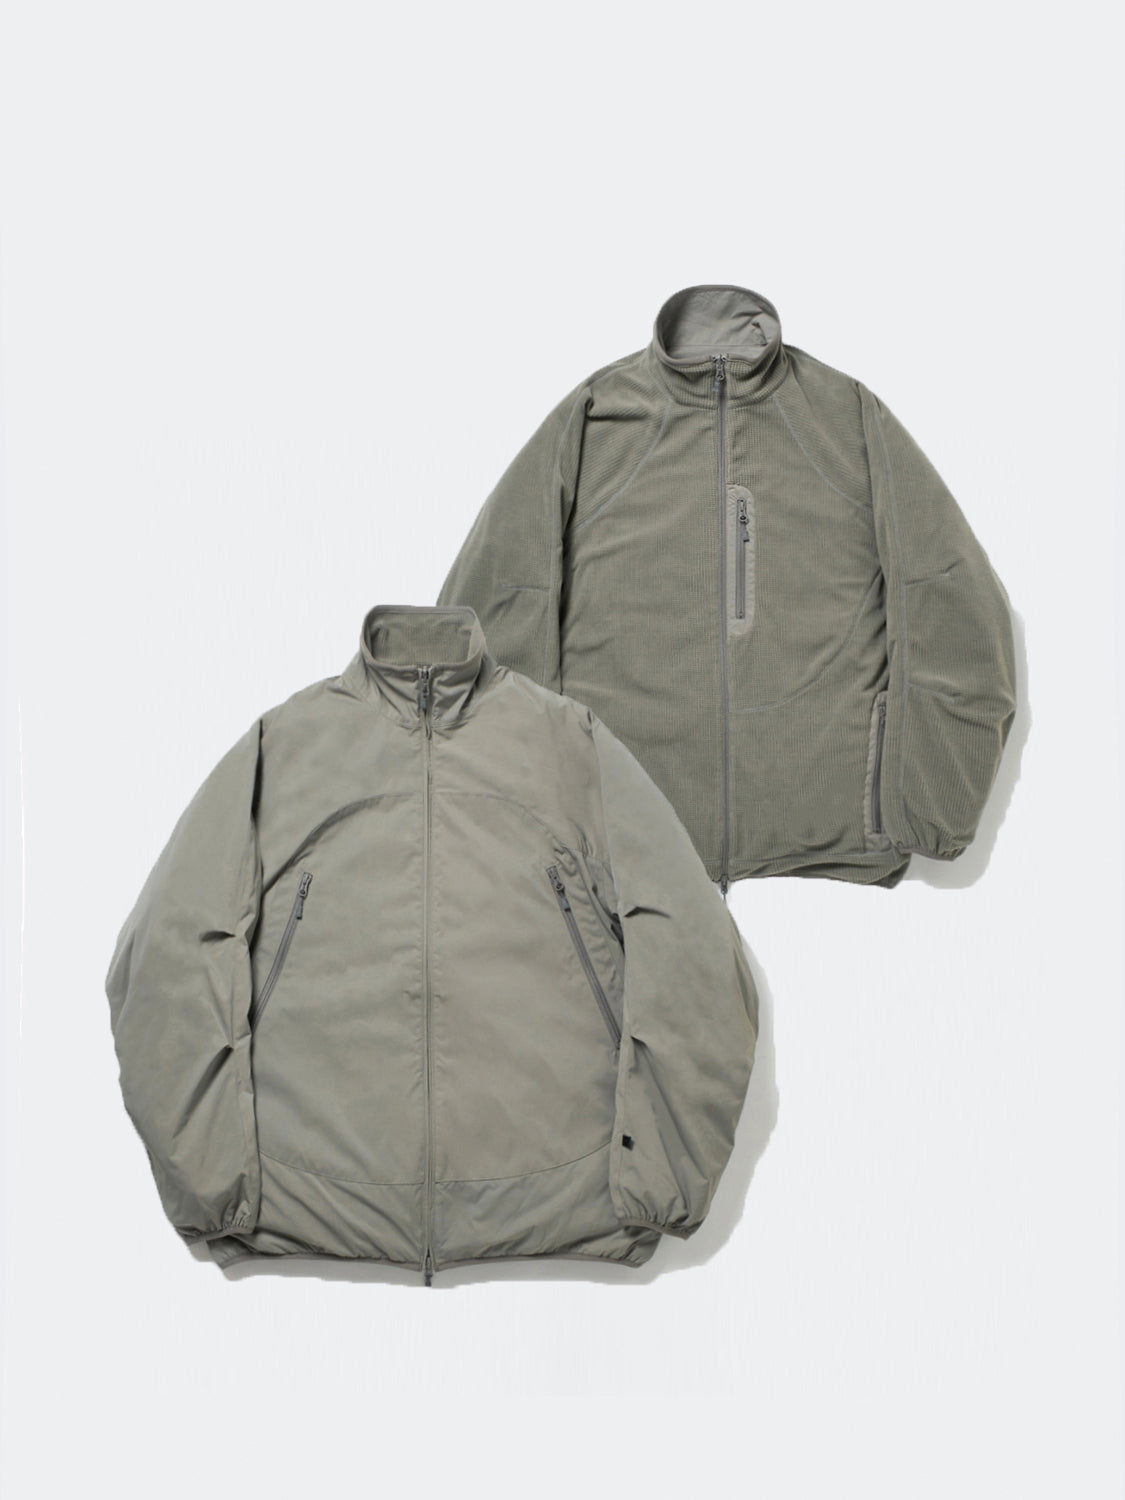 TECH REVERSIBLE MIL ECWCS STAND JACKET-